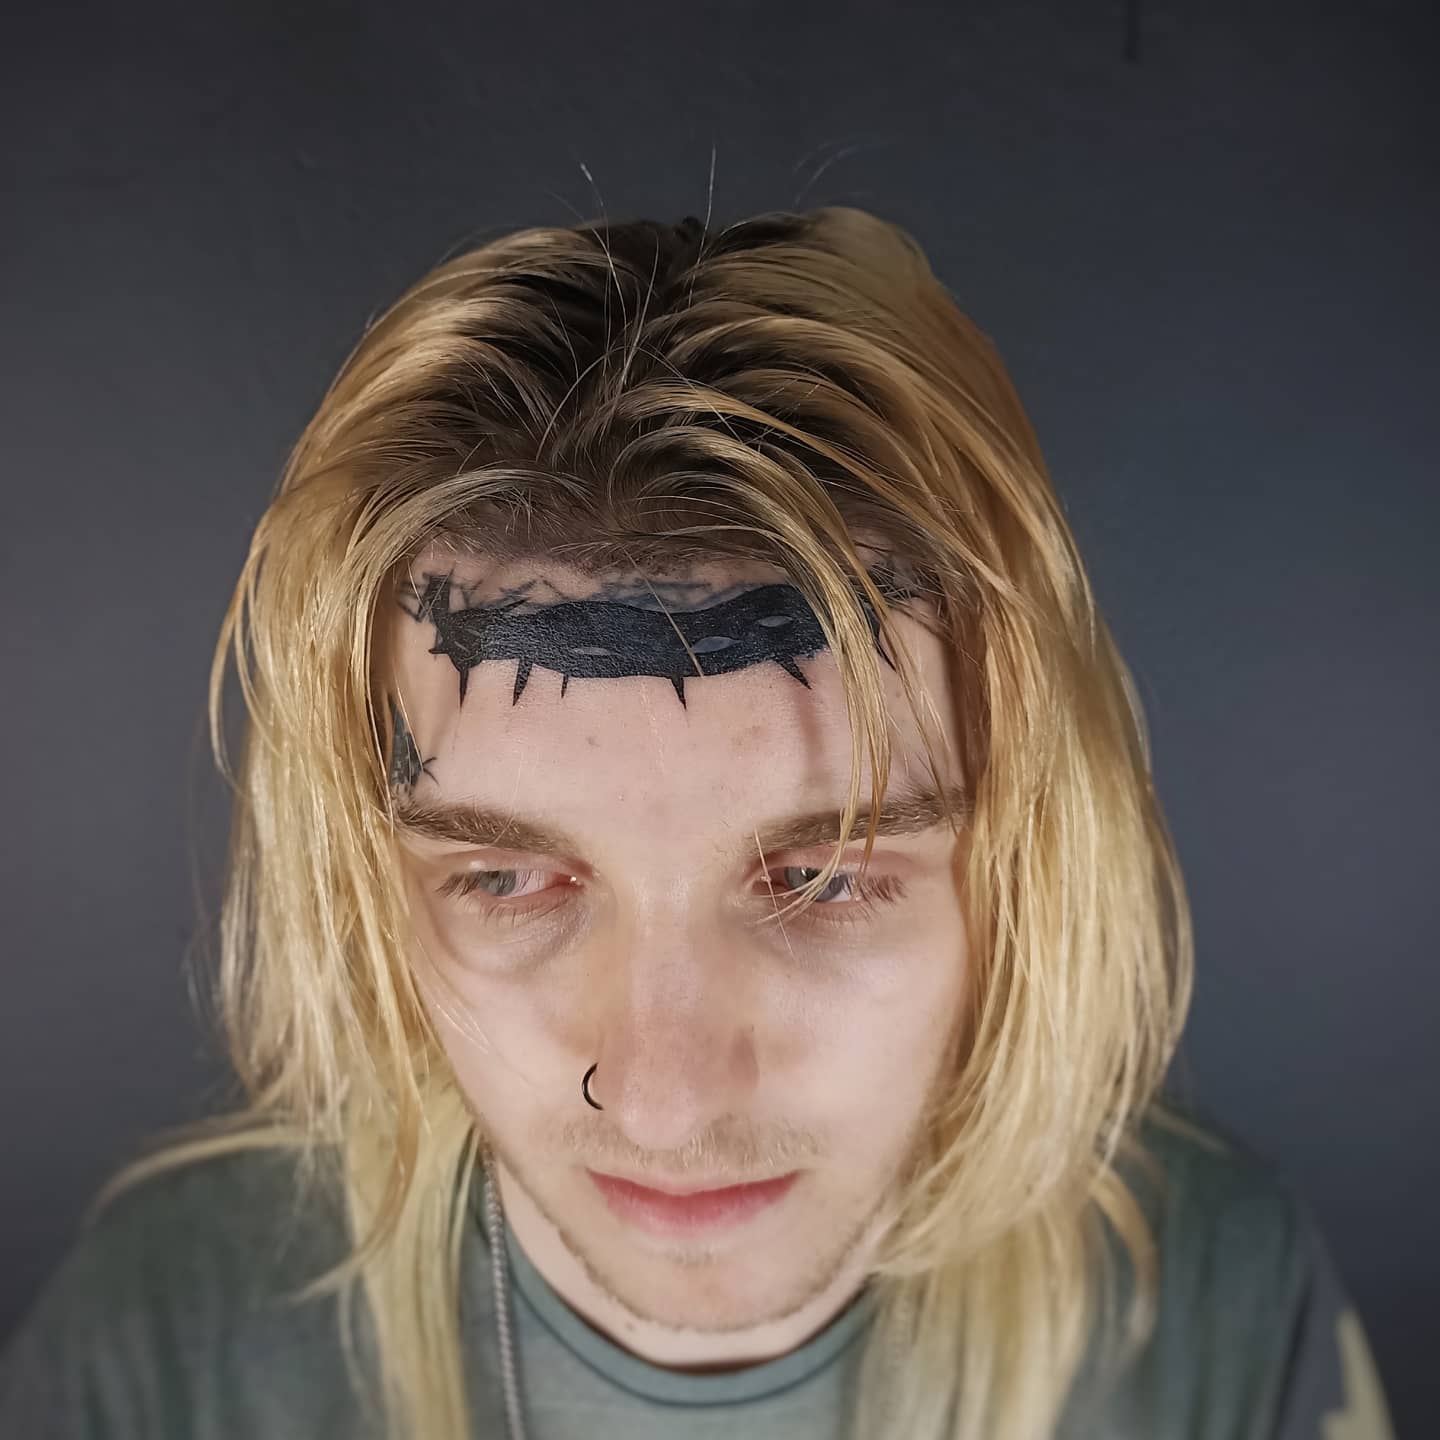 Thorn or Wire Forehead Tattoo -yungturk666